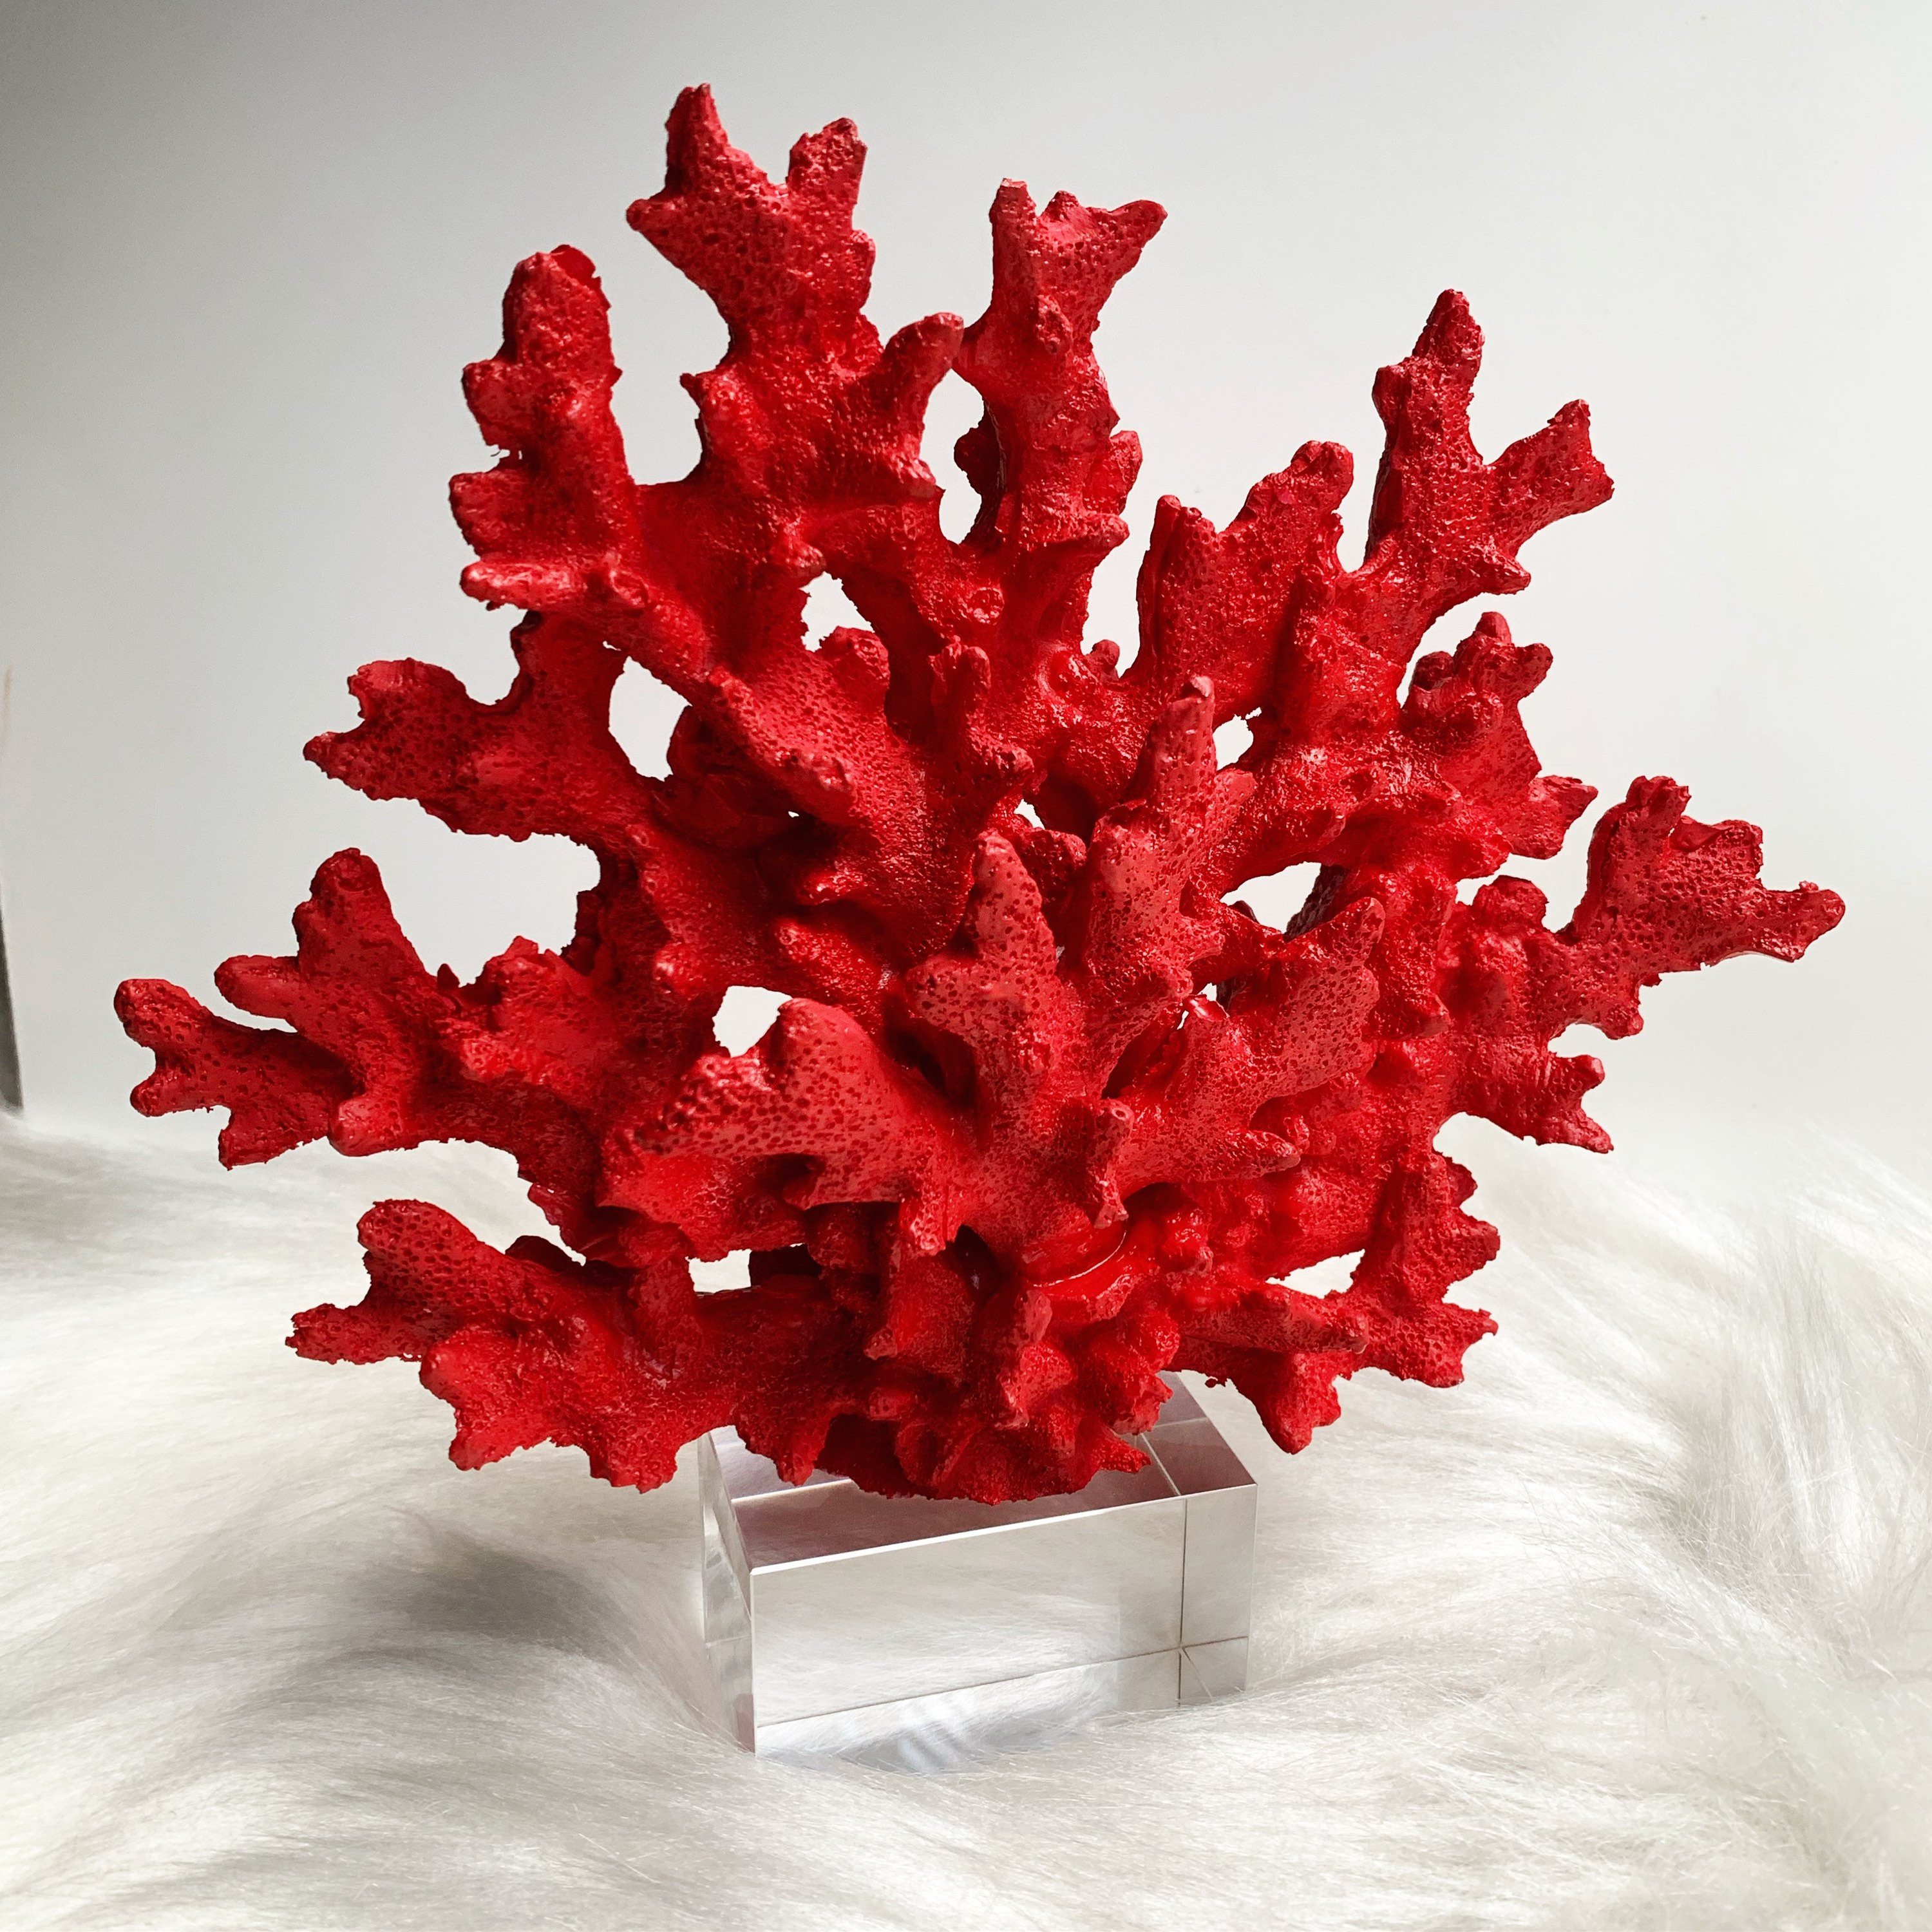 Decorative Red Crystal Coral Reef, Office Decor, Coral Object, Coral Stone  Sculpture, Luxury Home Decor Objects, Christmas Gifts for Her 